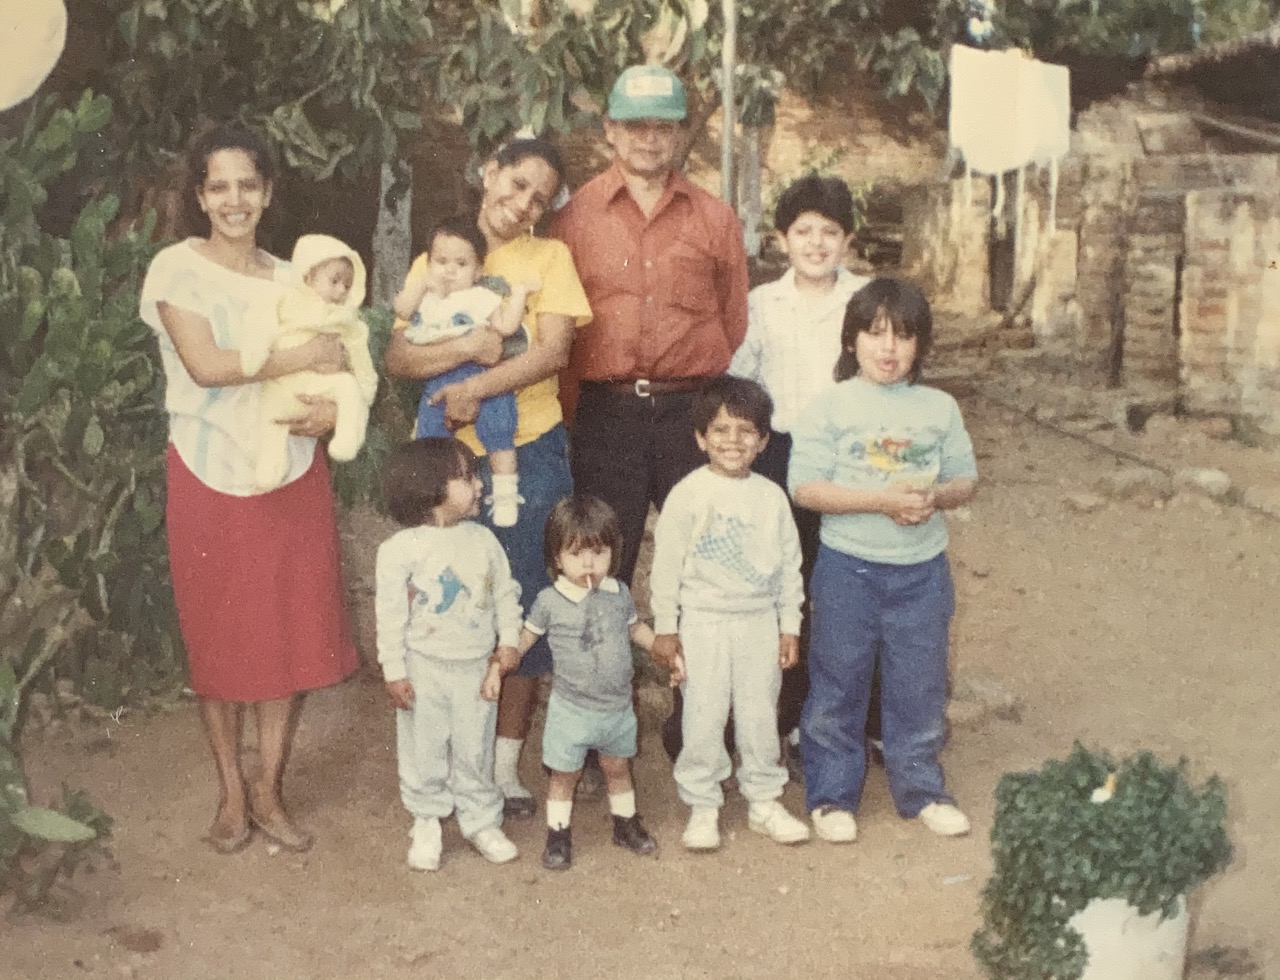 The Molina kids, tia Rosa, tia Chayo and cousins with their abuelo Don Chevio in the late 1980s